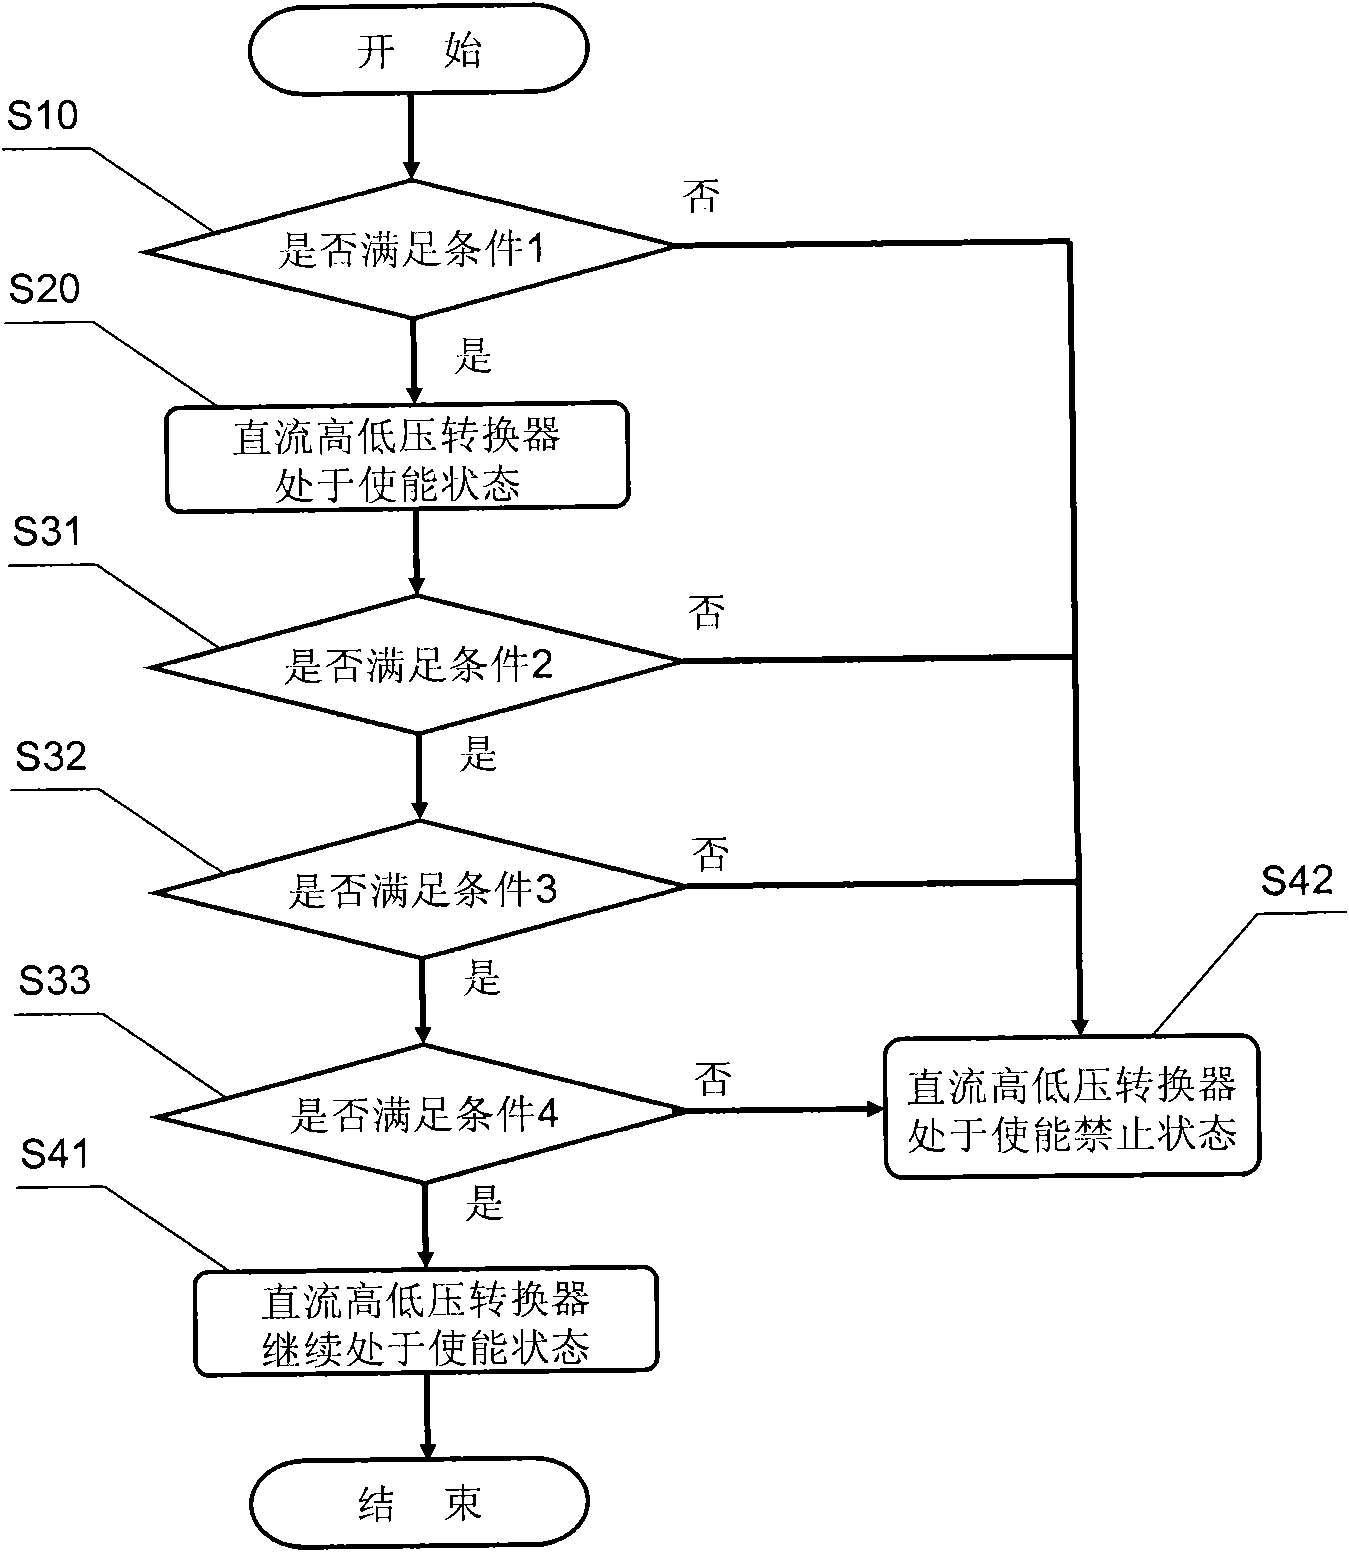 Enabling control method and output voltage control method of direct current-direct current converter (DC-DC converter)